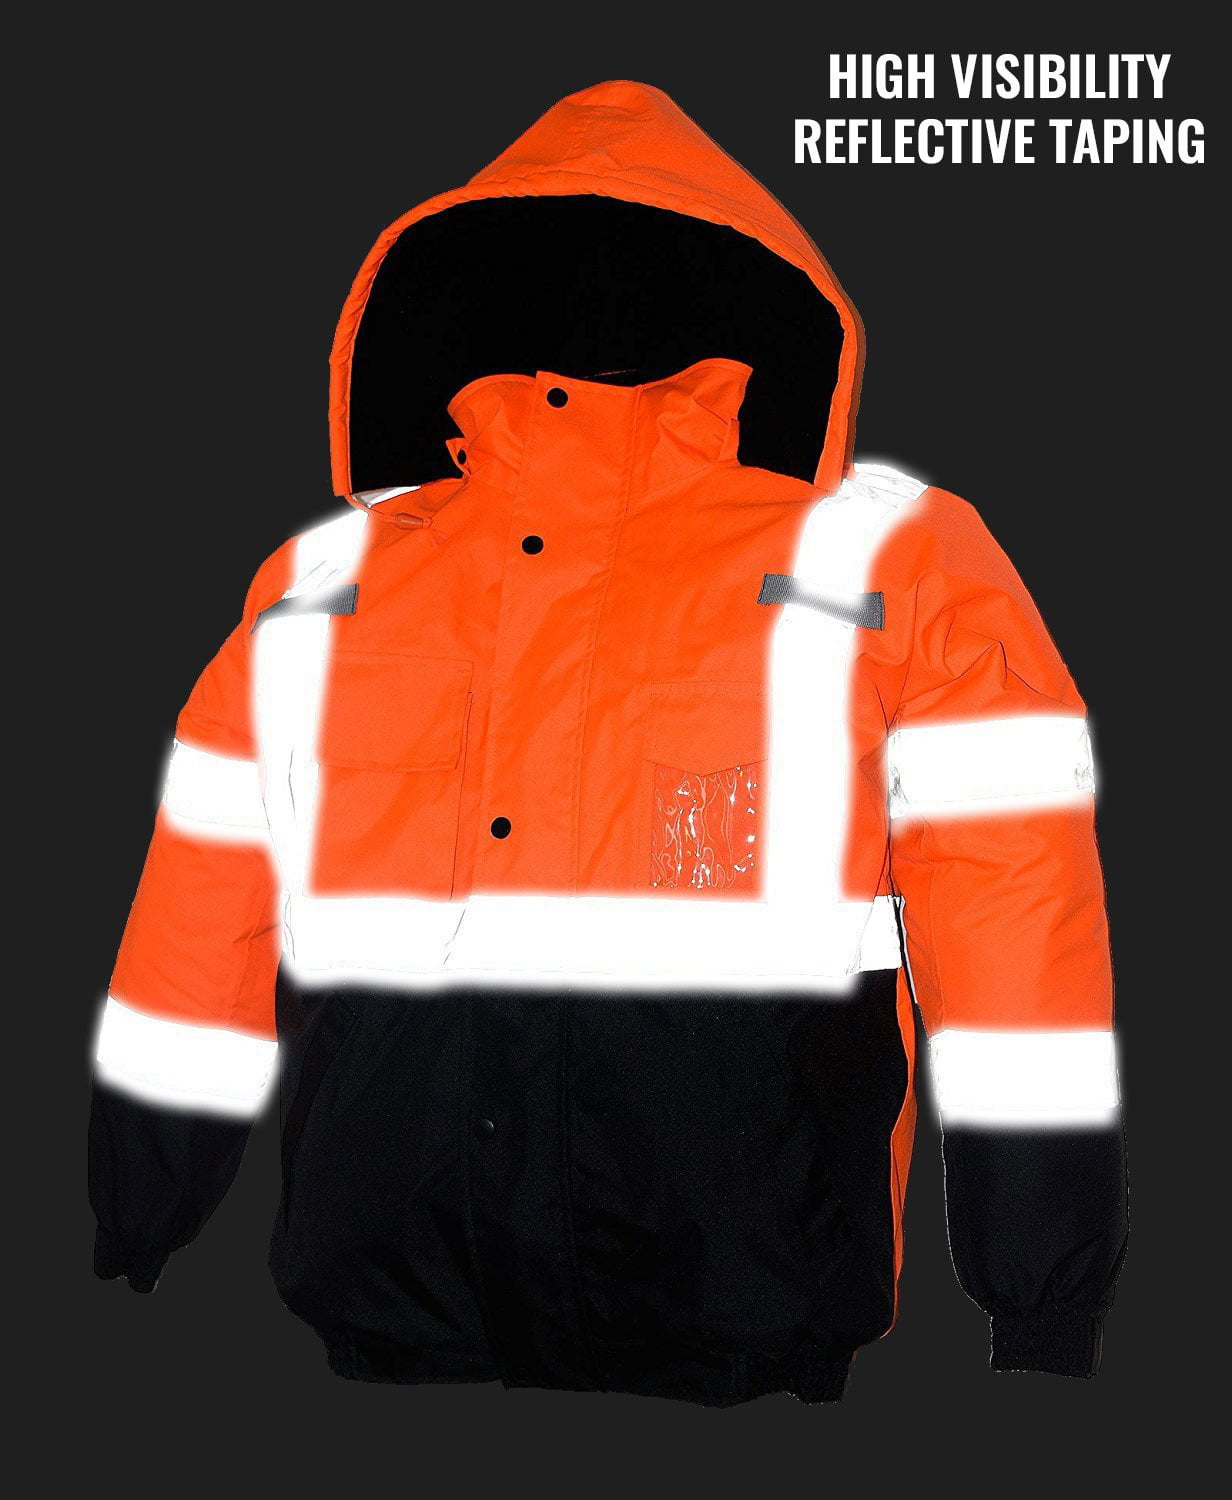 SHORFUNE High Visibility Safety Bomber Jacket for Men, Waterproof Class 3  Reflective Jacket with Pockets & Cotton Lining, Designed for Work,  Construction and Outdoor, Orange, M 